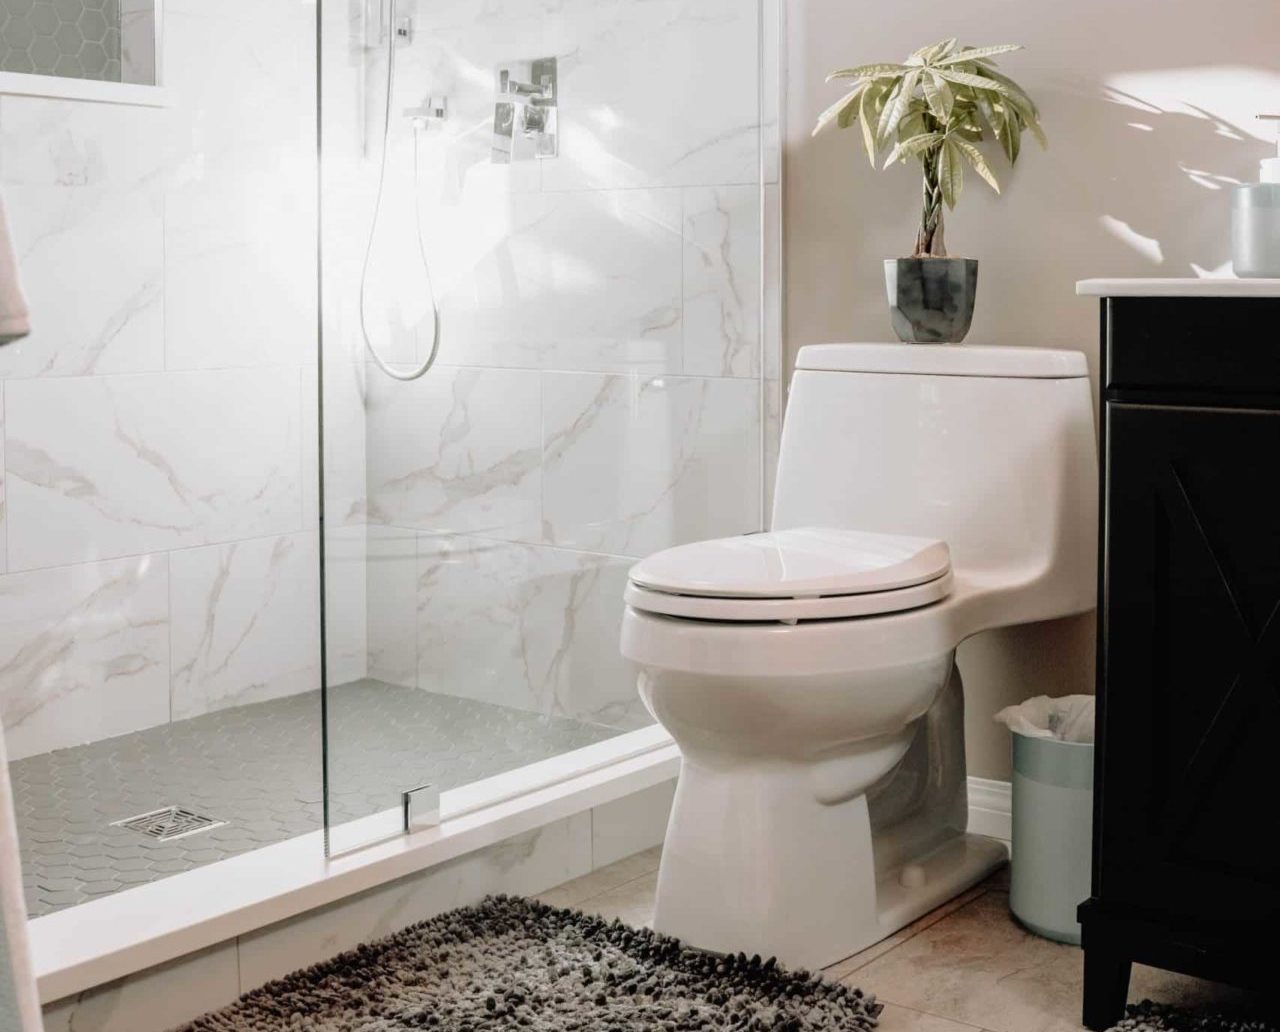 A sparkly-clean bathroom with streak-free shower glass doors thanks to the Simple Scrub.